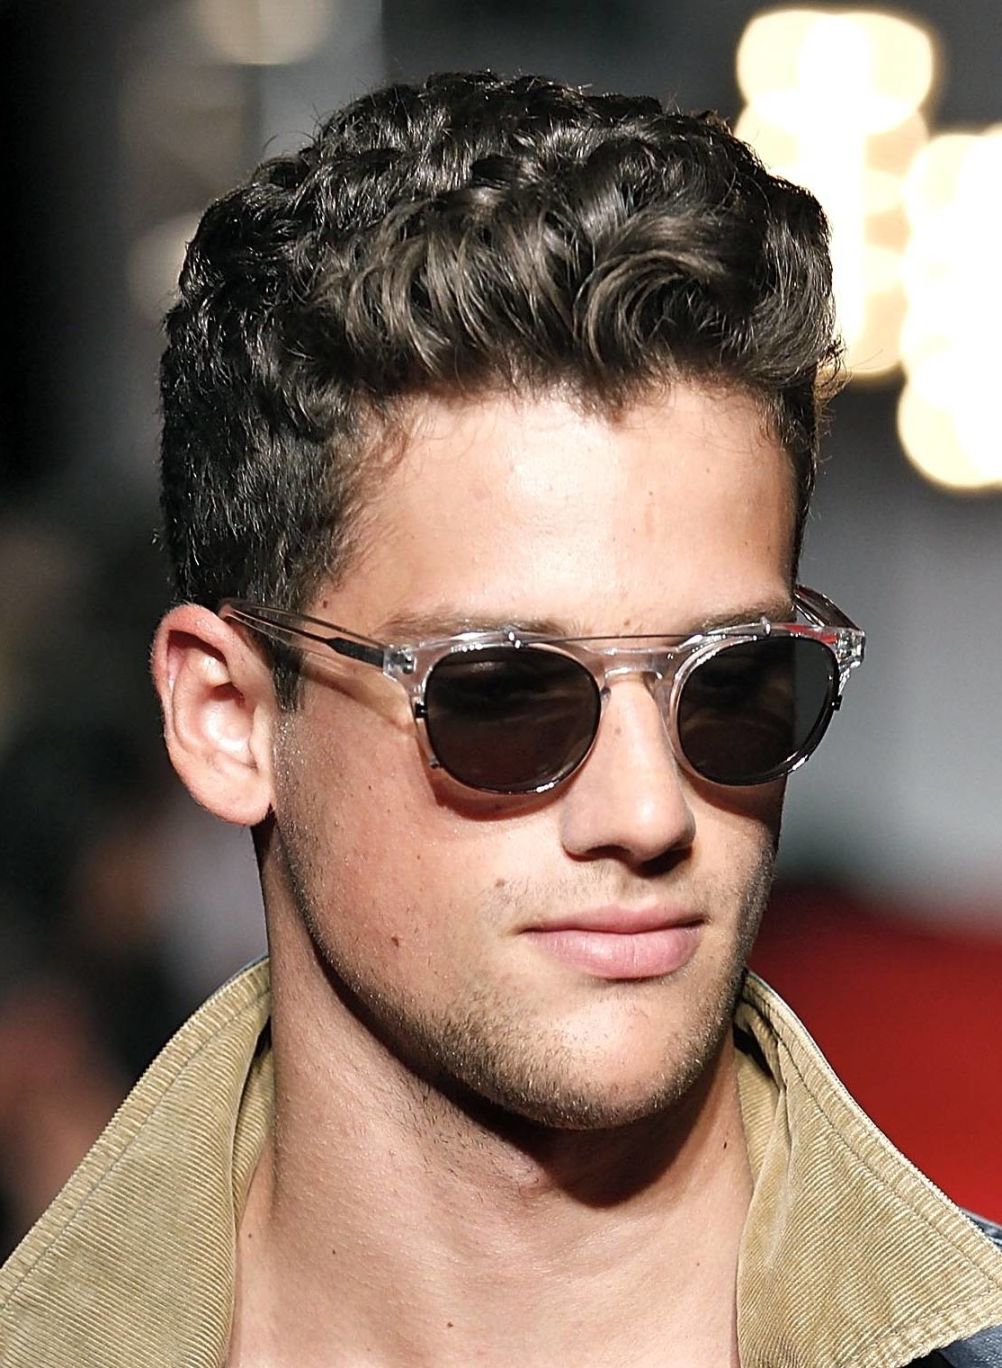 Curly Hairstyles Haircuts For Men Edition